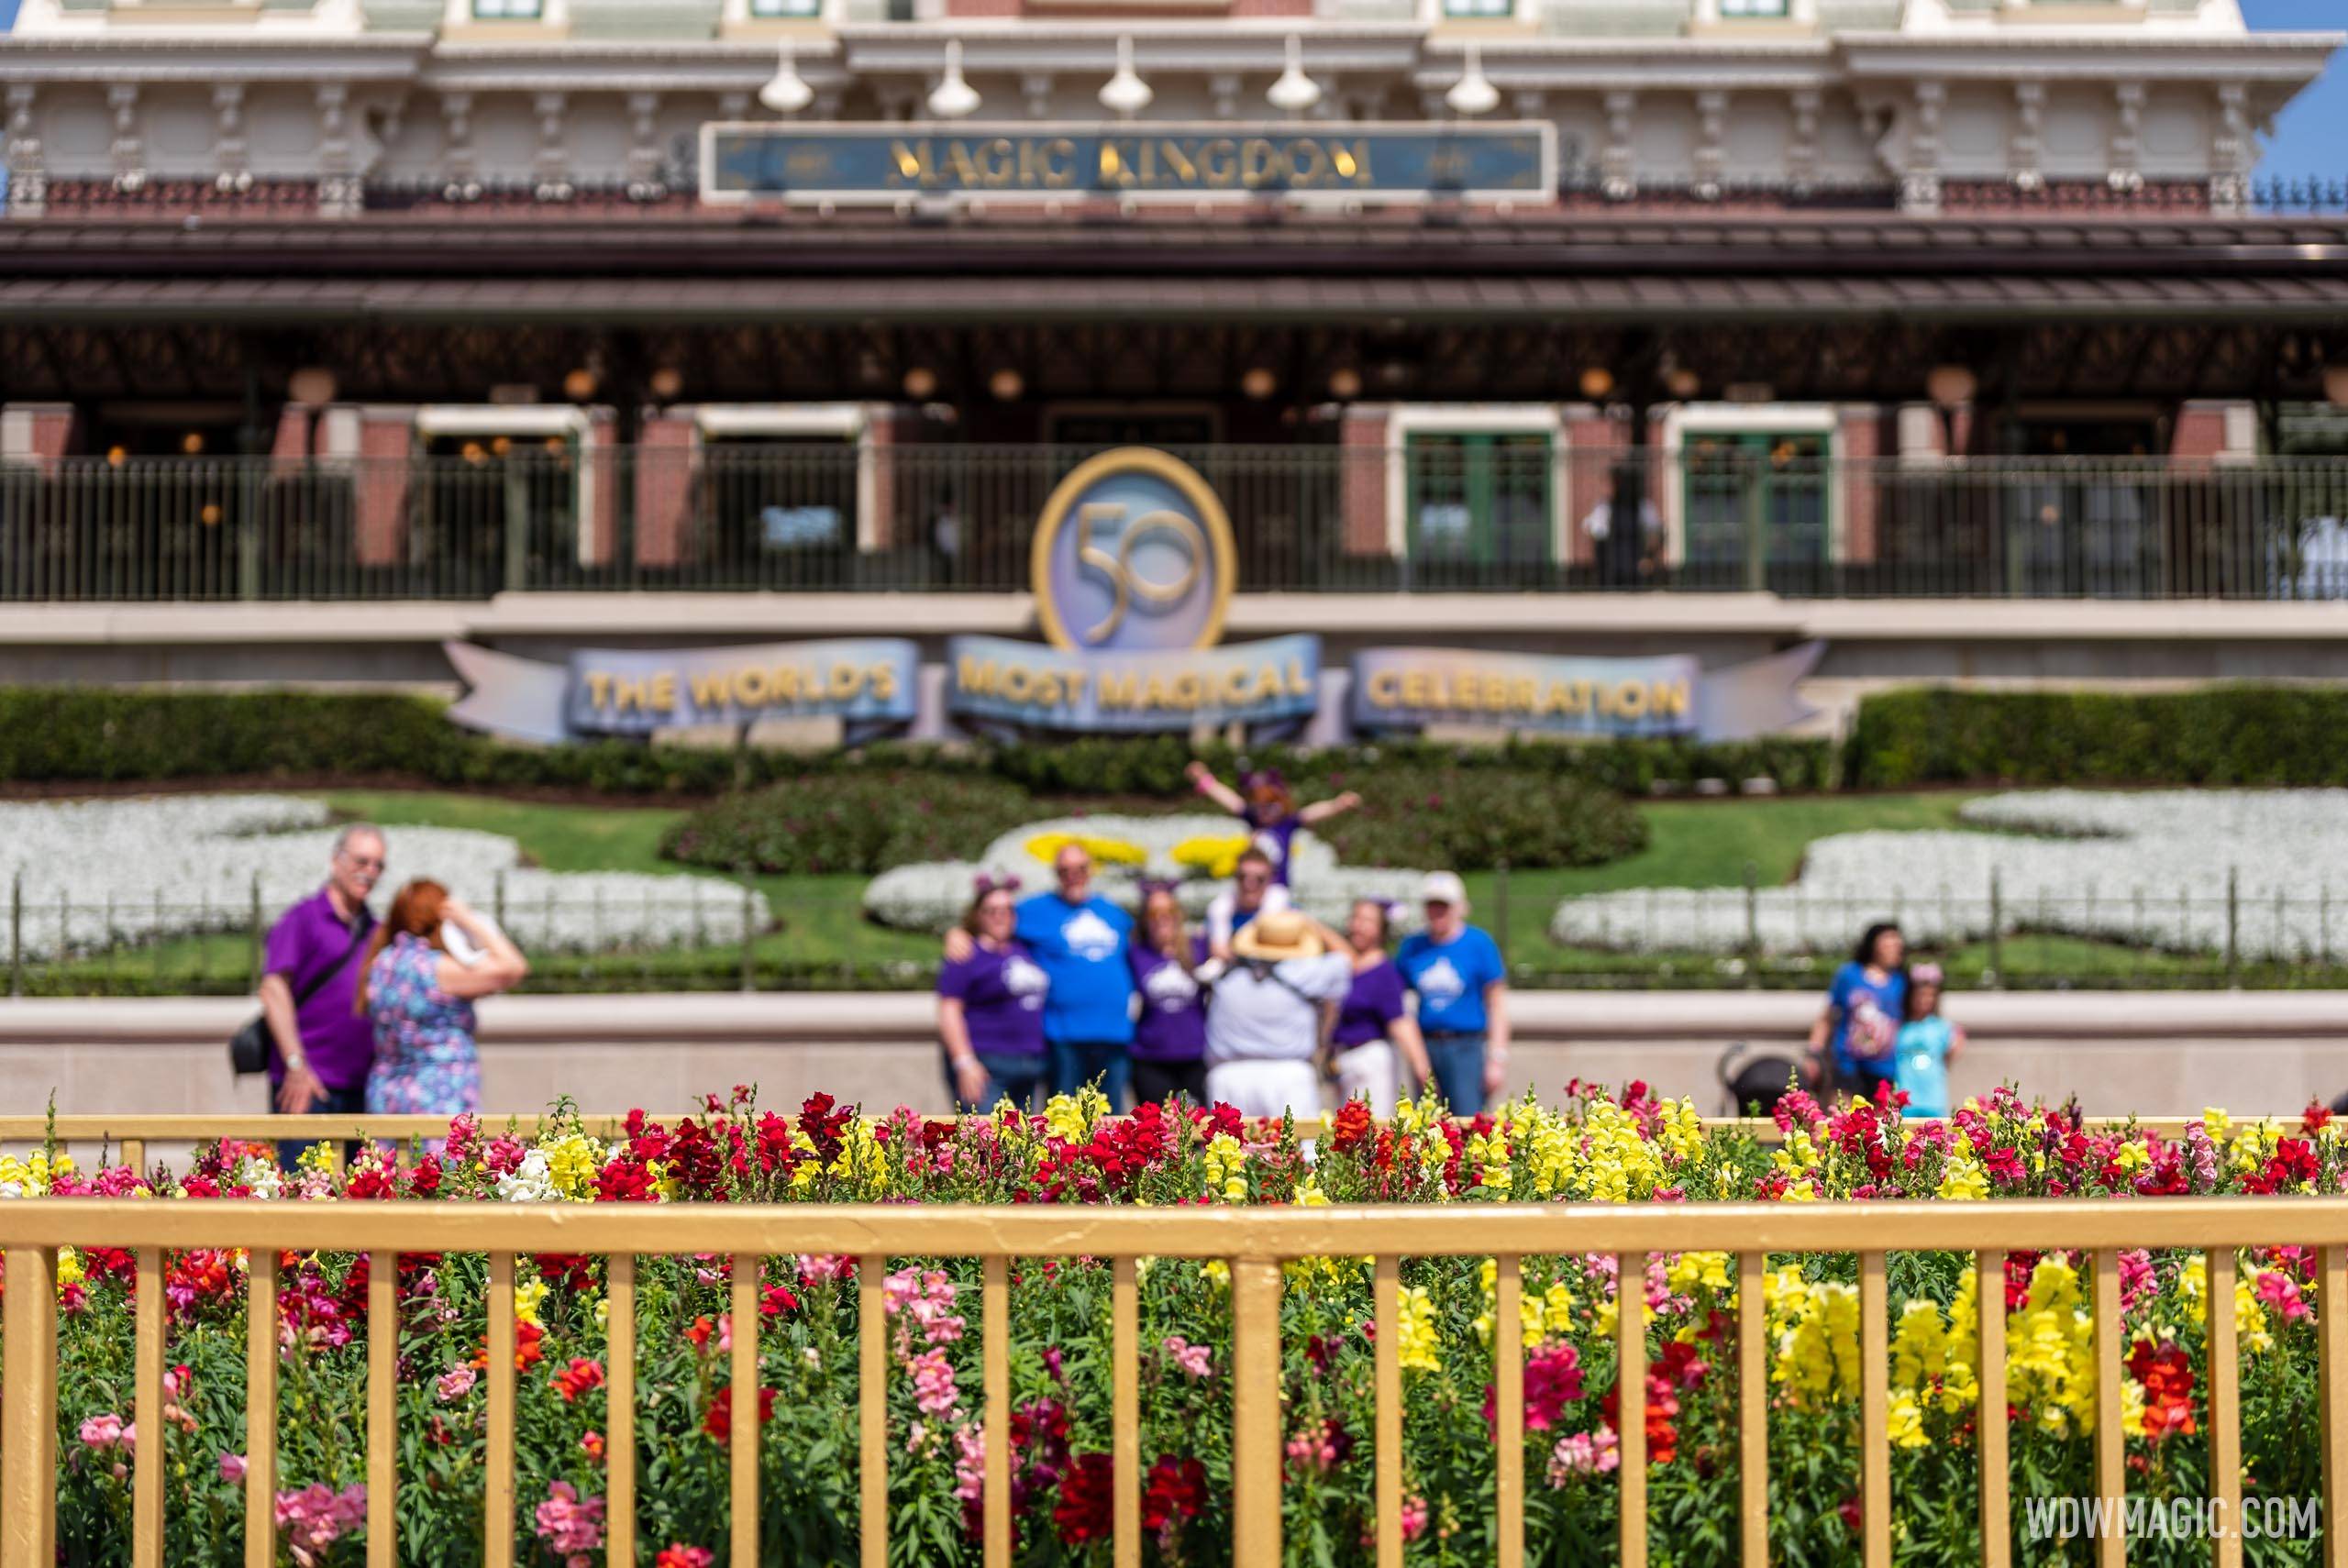 The Mickey and Minnie 50th topiary were removed late 2022